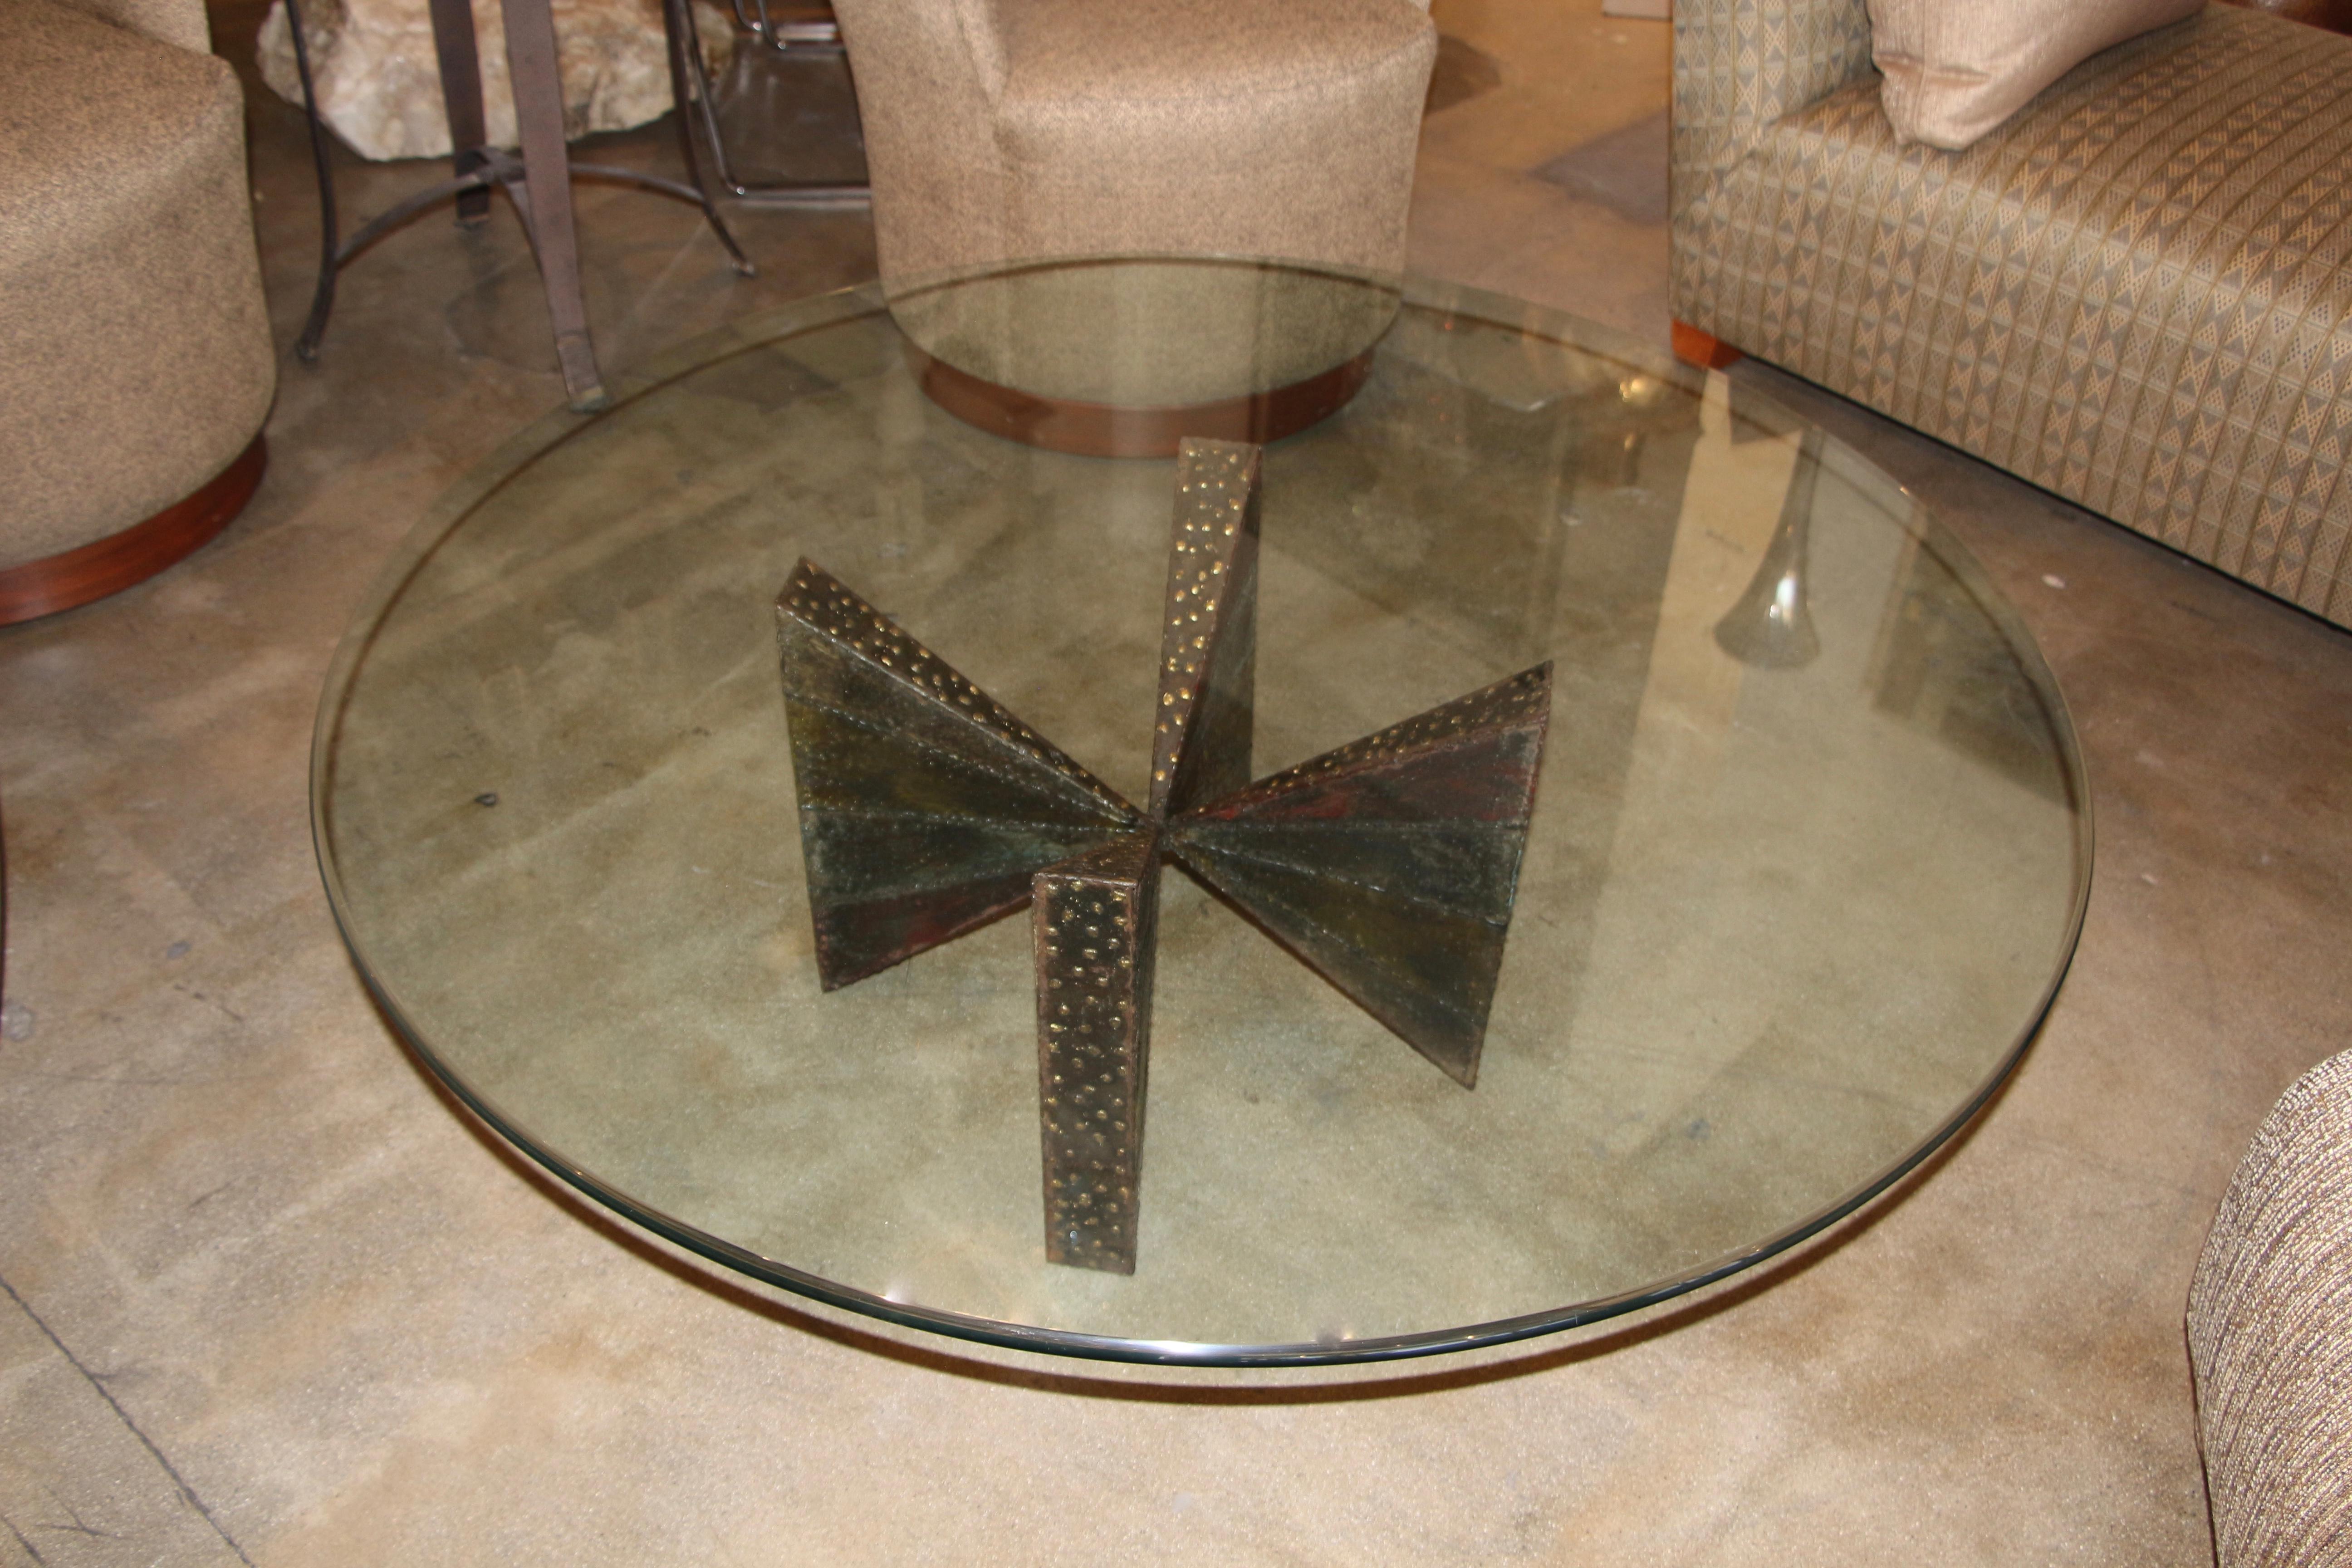 A nice coffee table base by Paul Evans for Directional, monogrammed and dated 1967. has a 48 inch piece of glass on it. sells with or without the glass buyers choice. Nice color and patina with gold color brass/bronze accents. There is a some rust